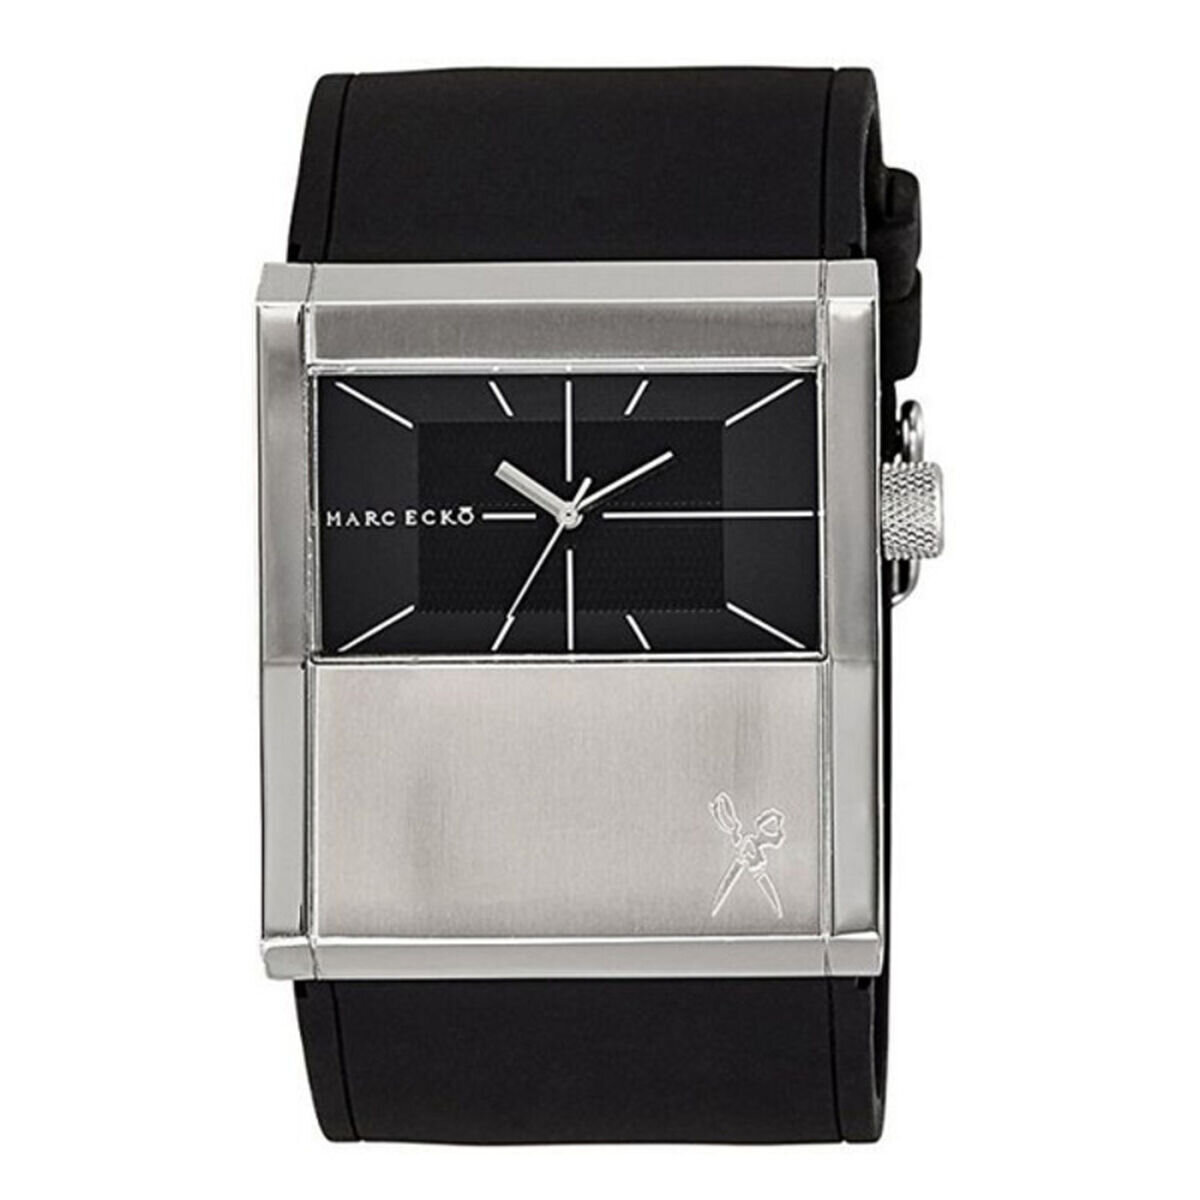 Men's Black and Silver Marc Ecko Watch